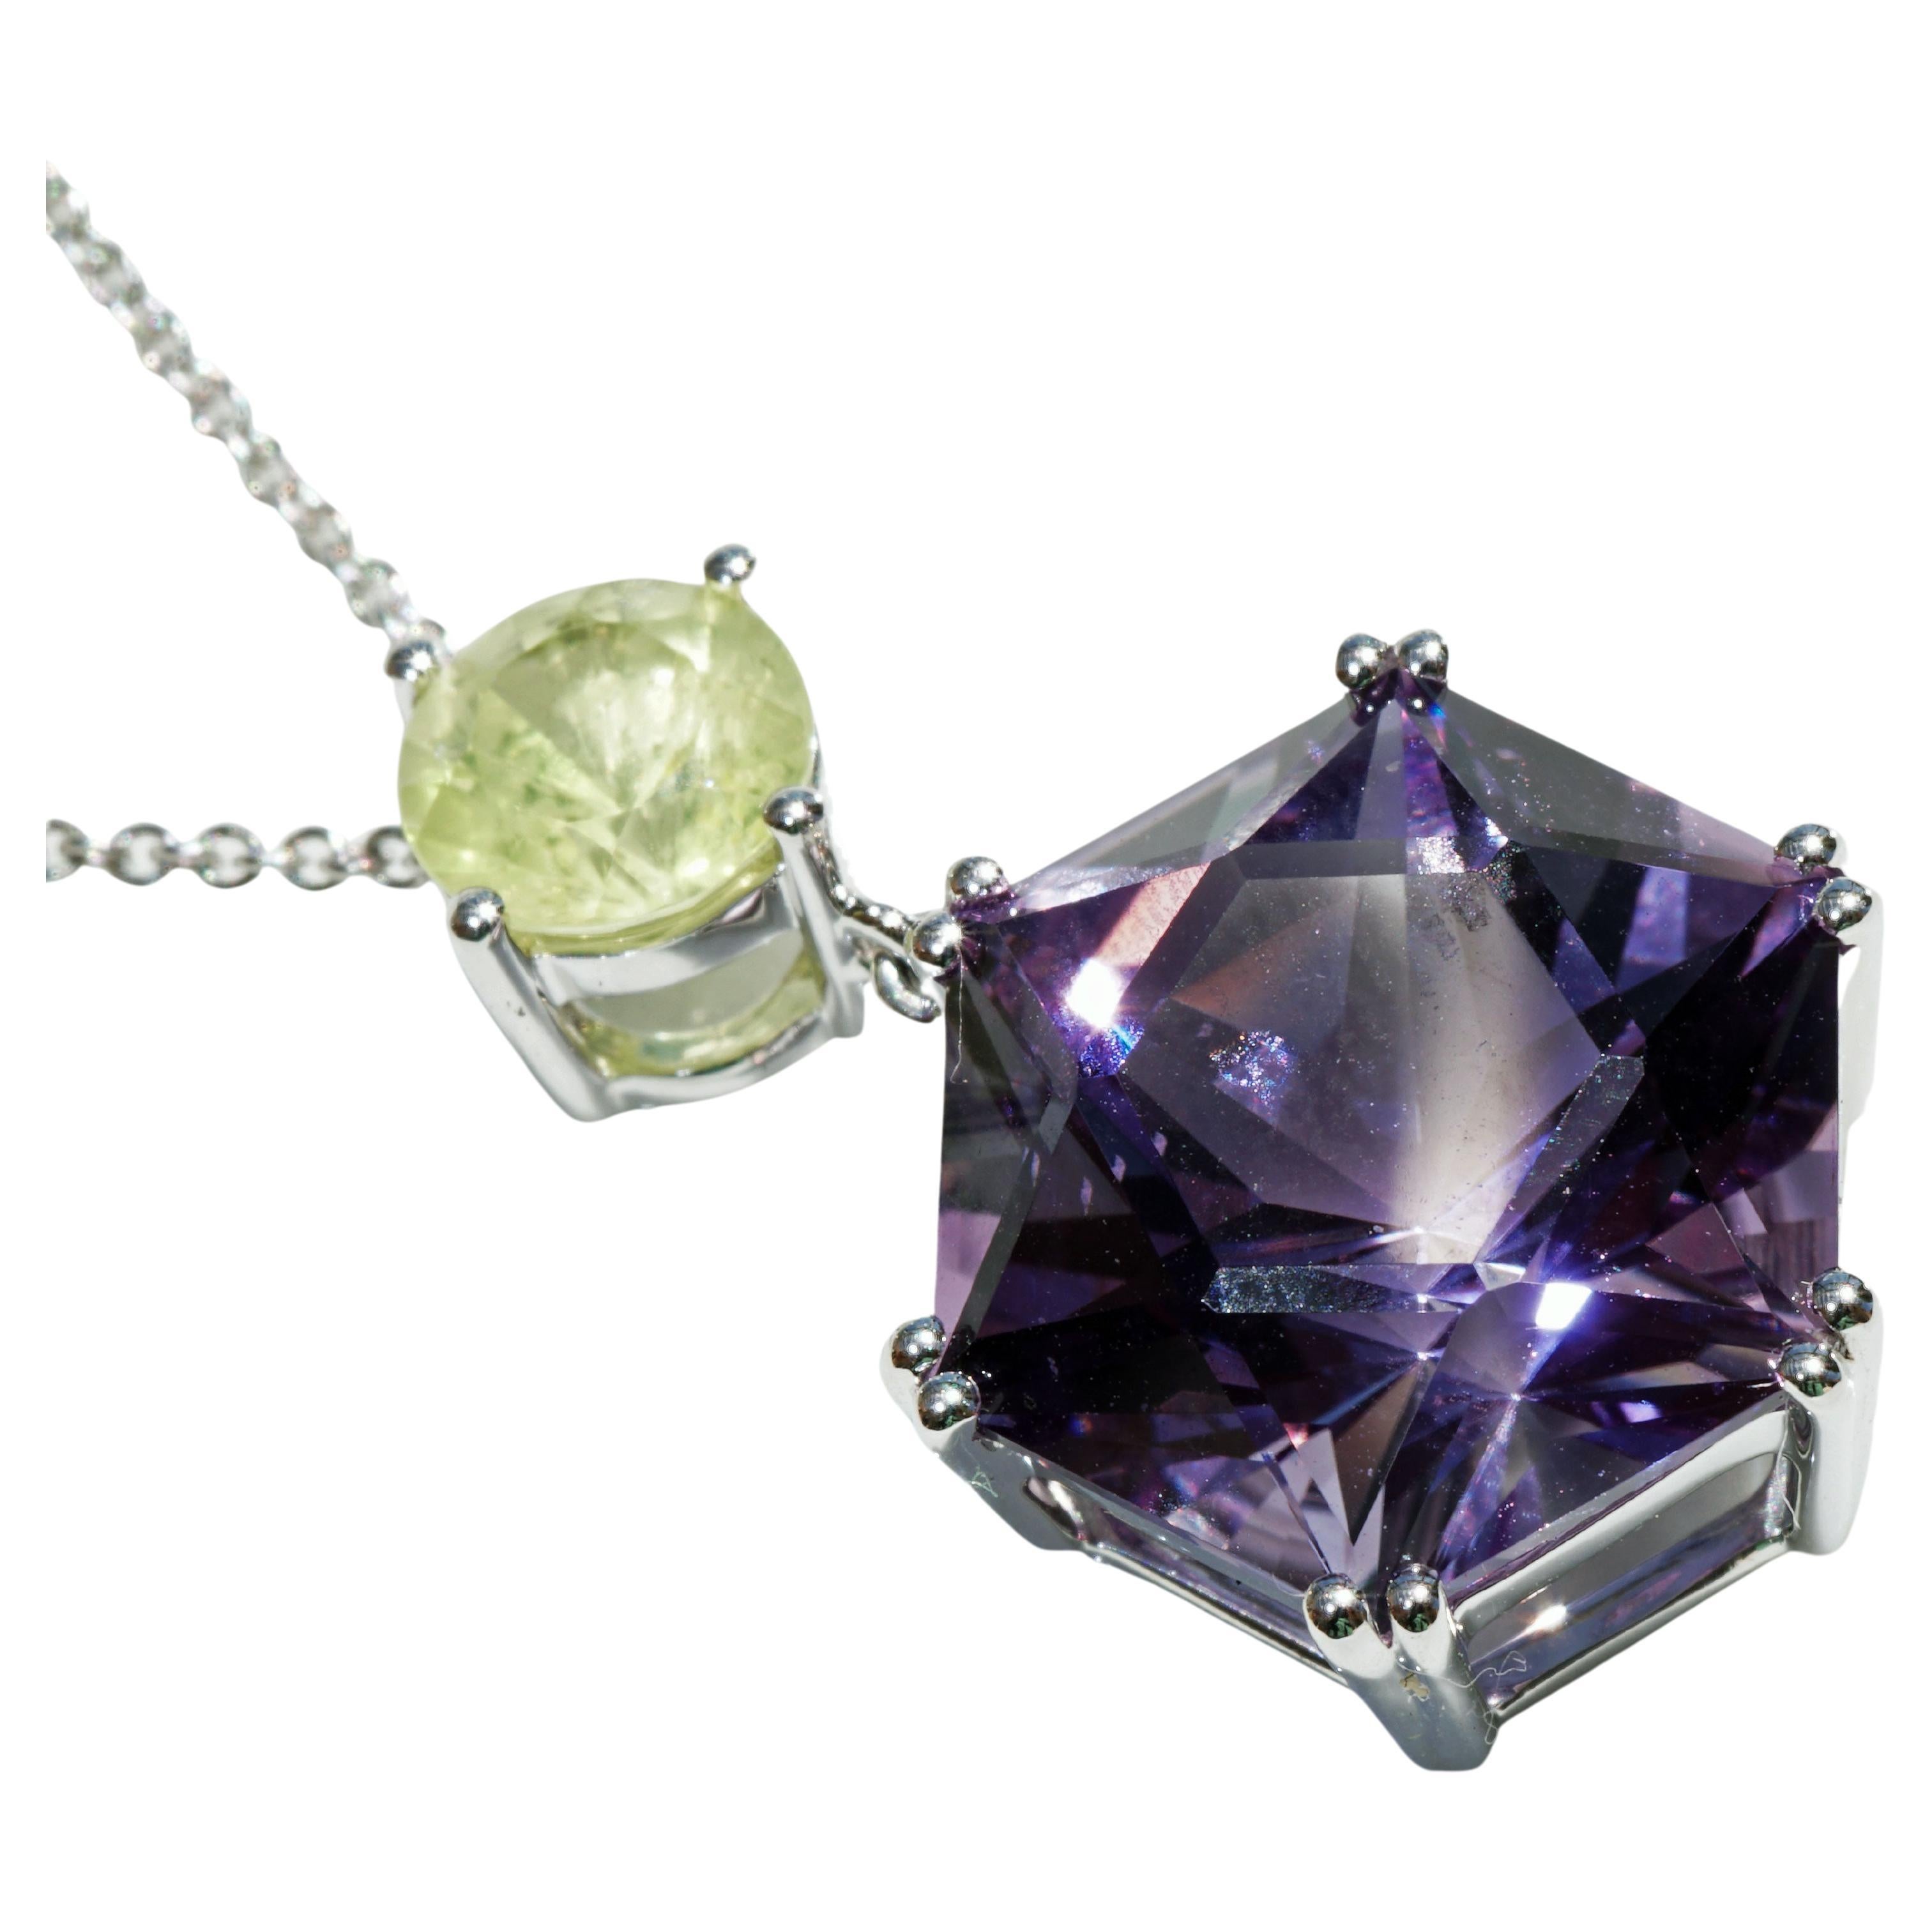 Chrysoberyll Amethyst Pendant with Chain neverseen Colors 10 ct Star Cut Brazil For Sale